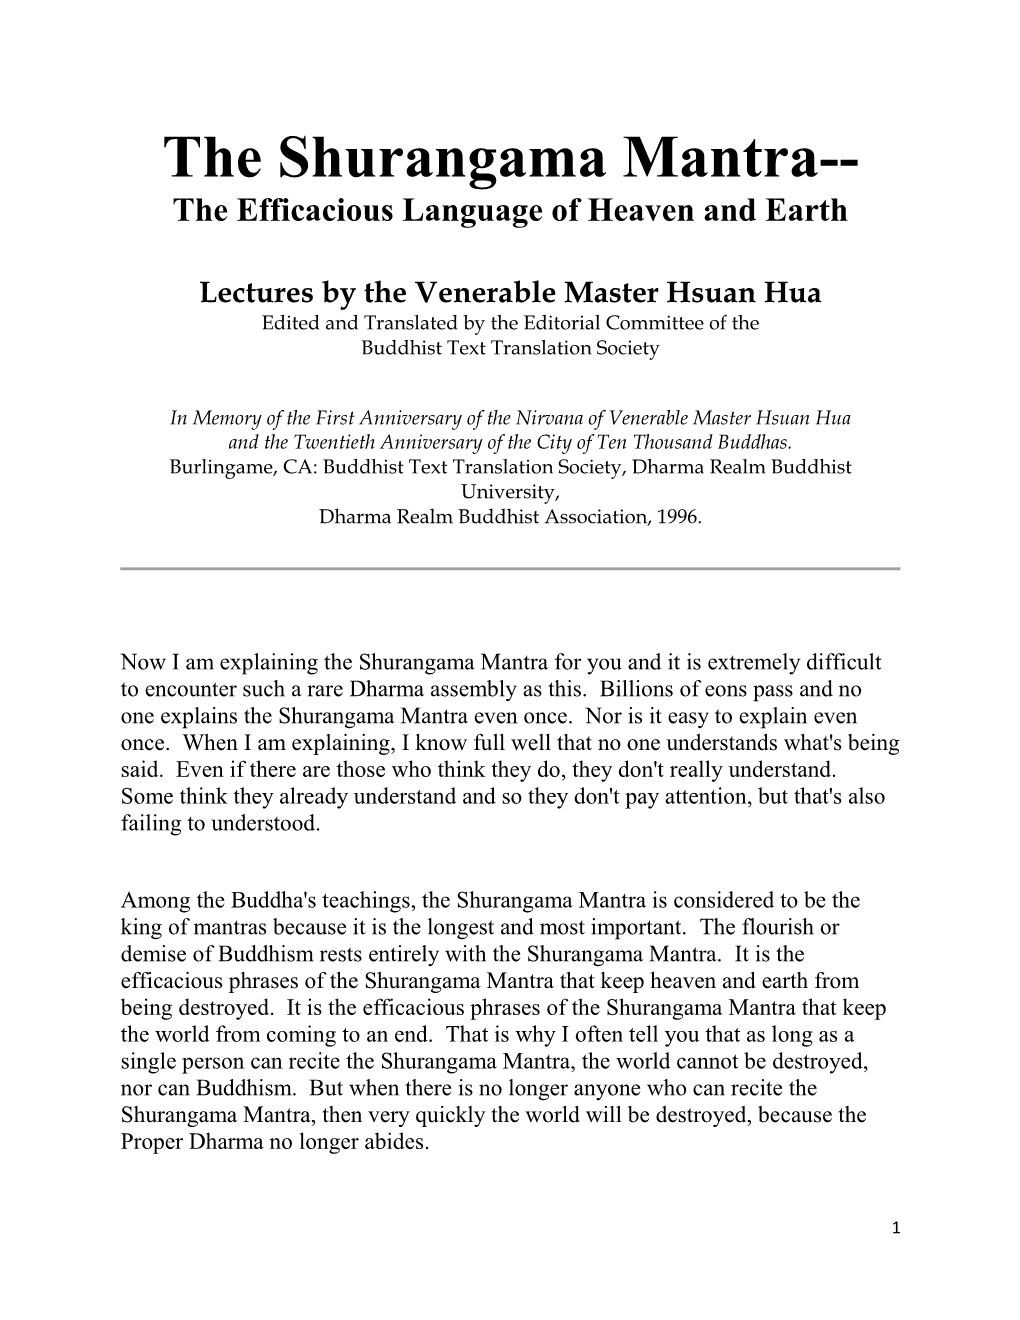 The Shurangama Mantra-- the Efficacious Language of Heaven and Earth